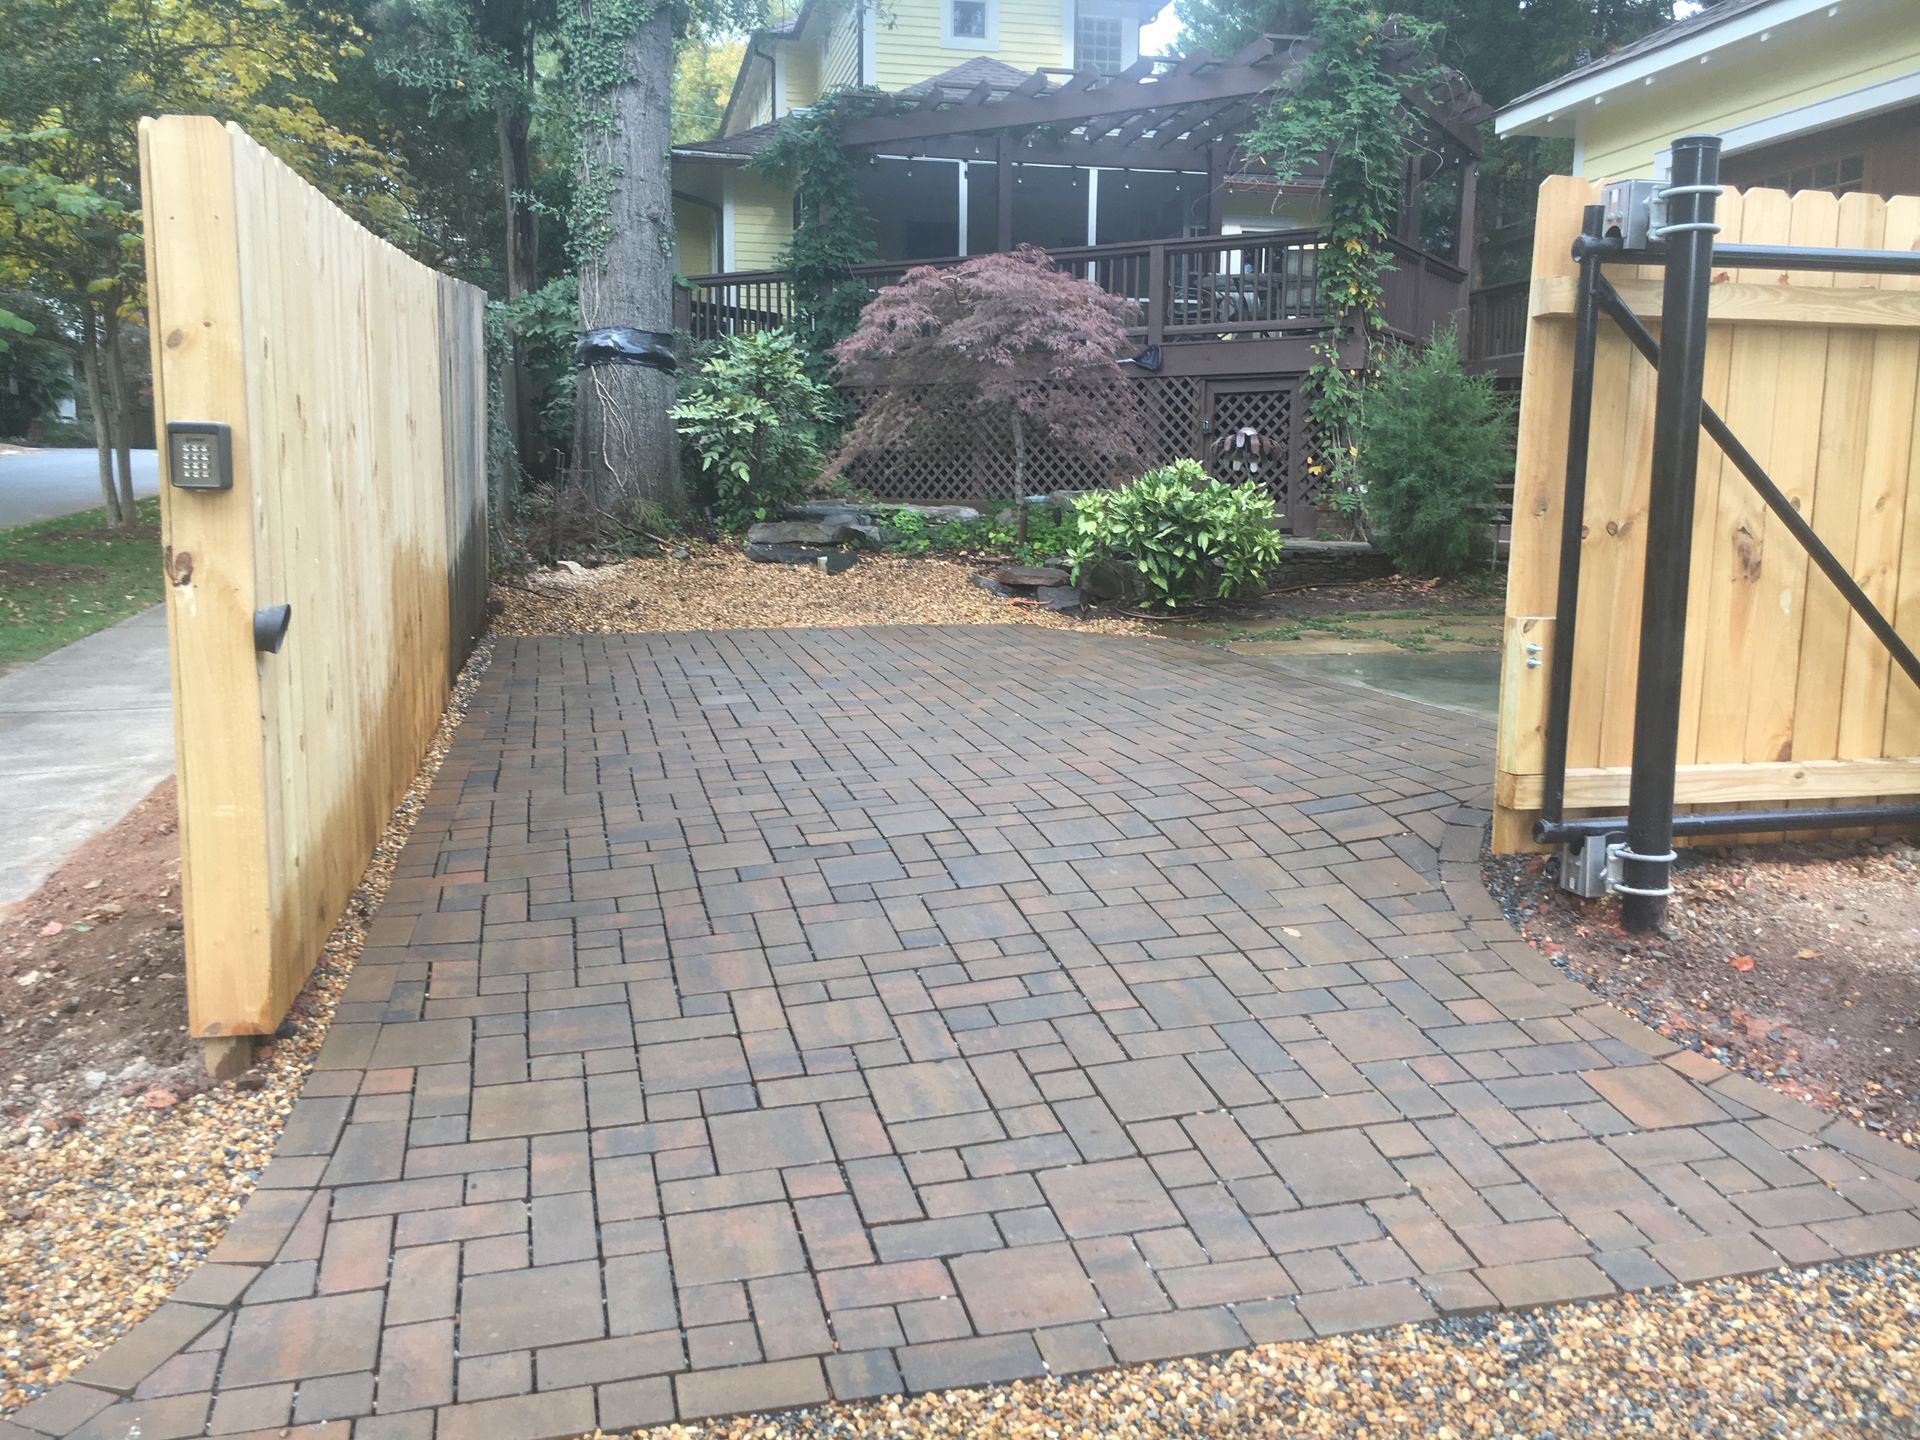 a brick driveway leading to a house with a wooden fence